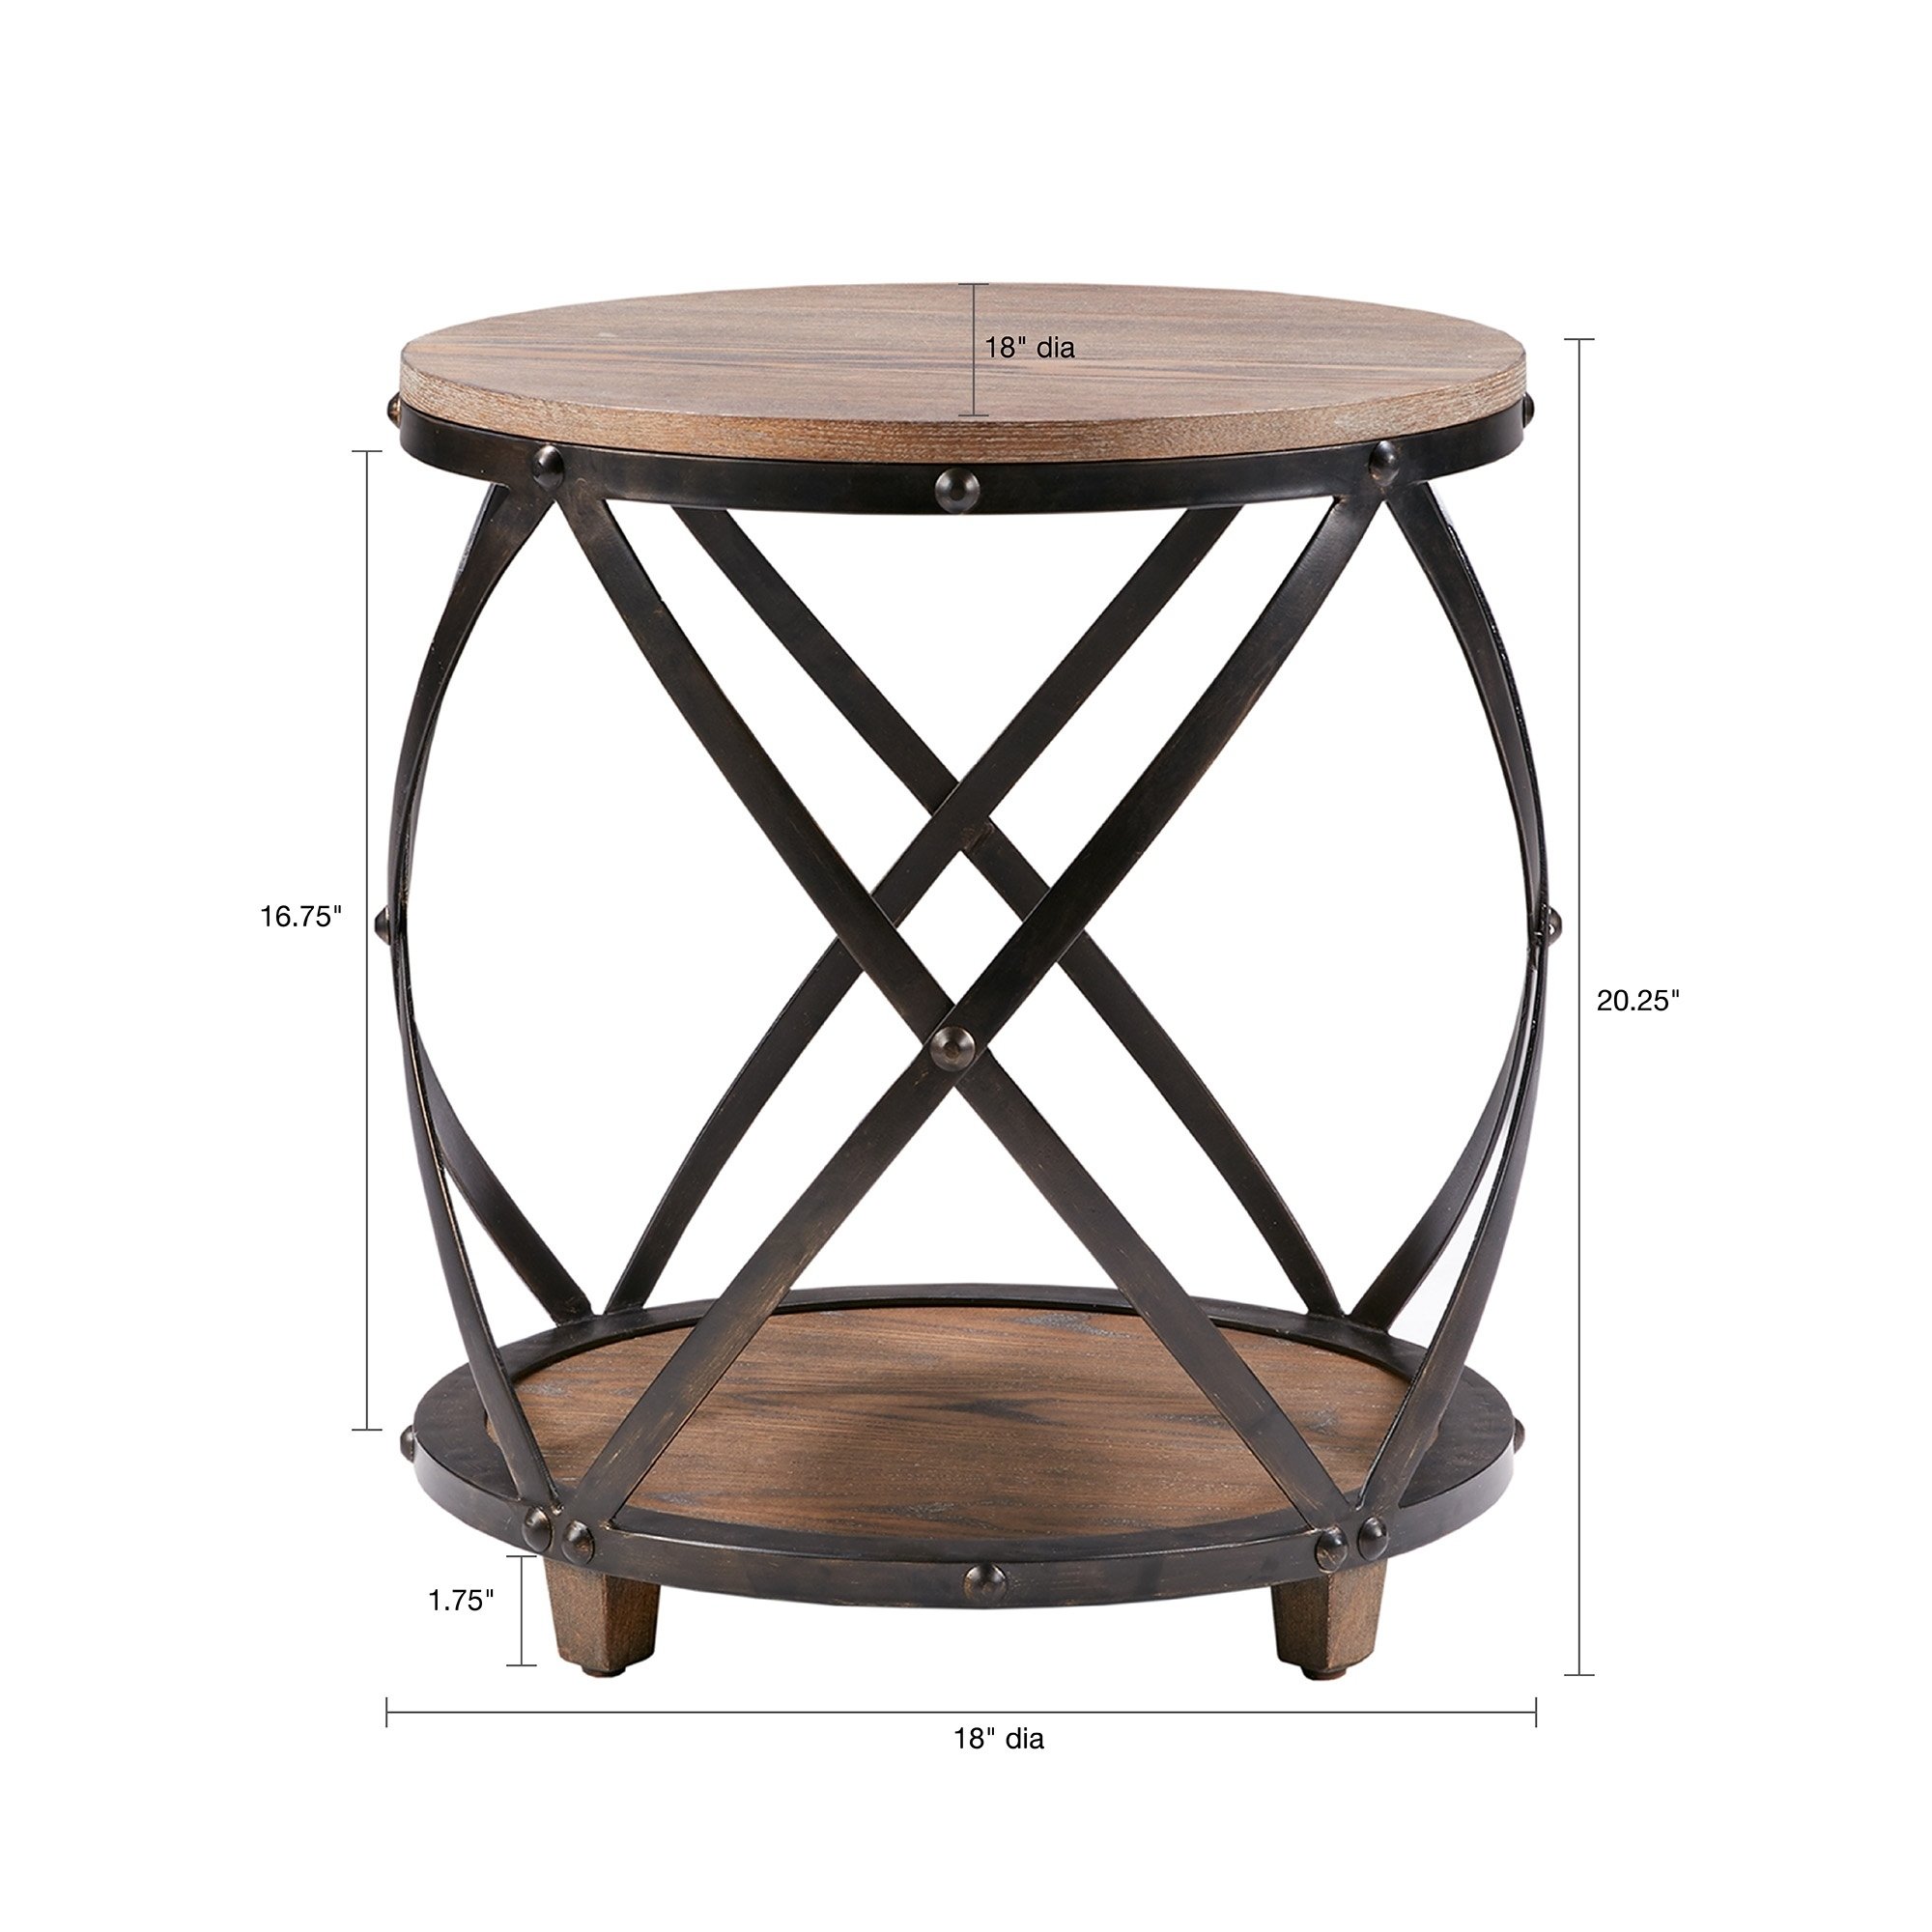 madison park kagen antique bronze bent metal accent table tables free shipping today pottery barn leather chair kitchen with chairs patio sun shades homebase garden coffee